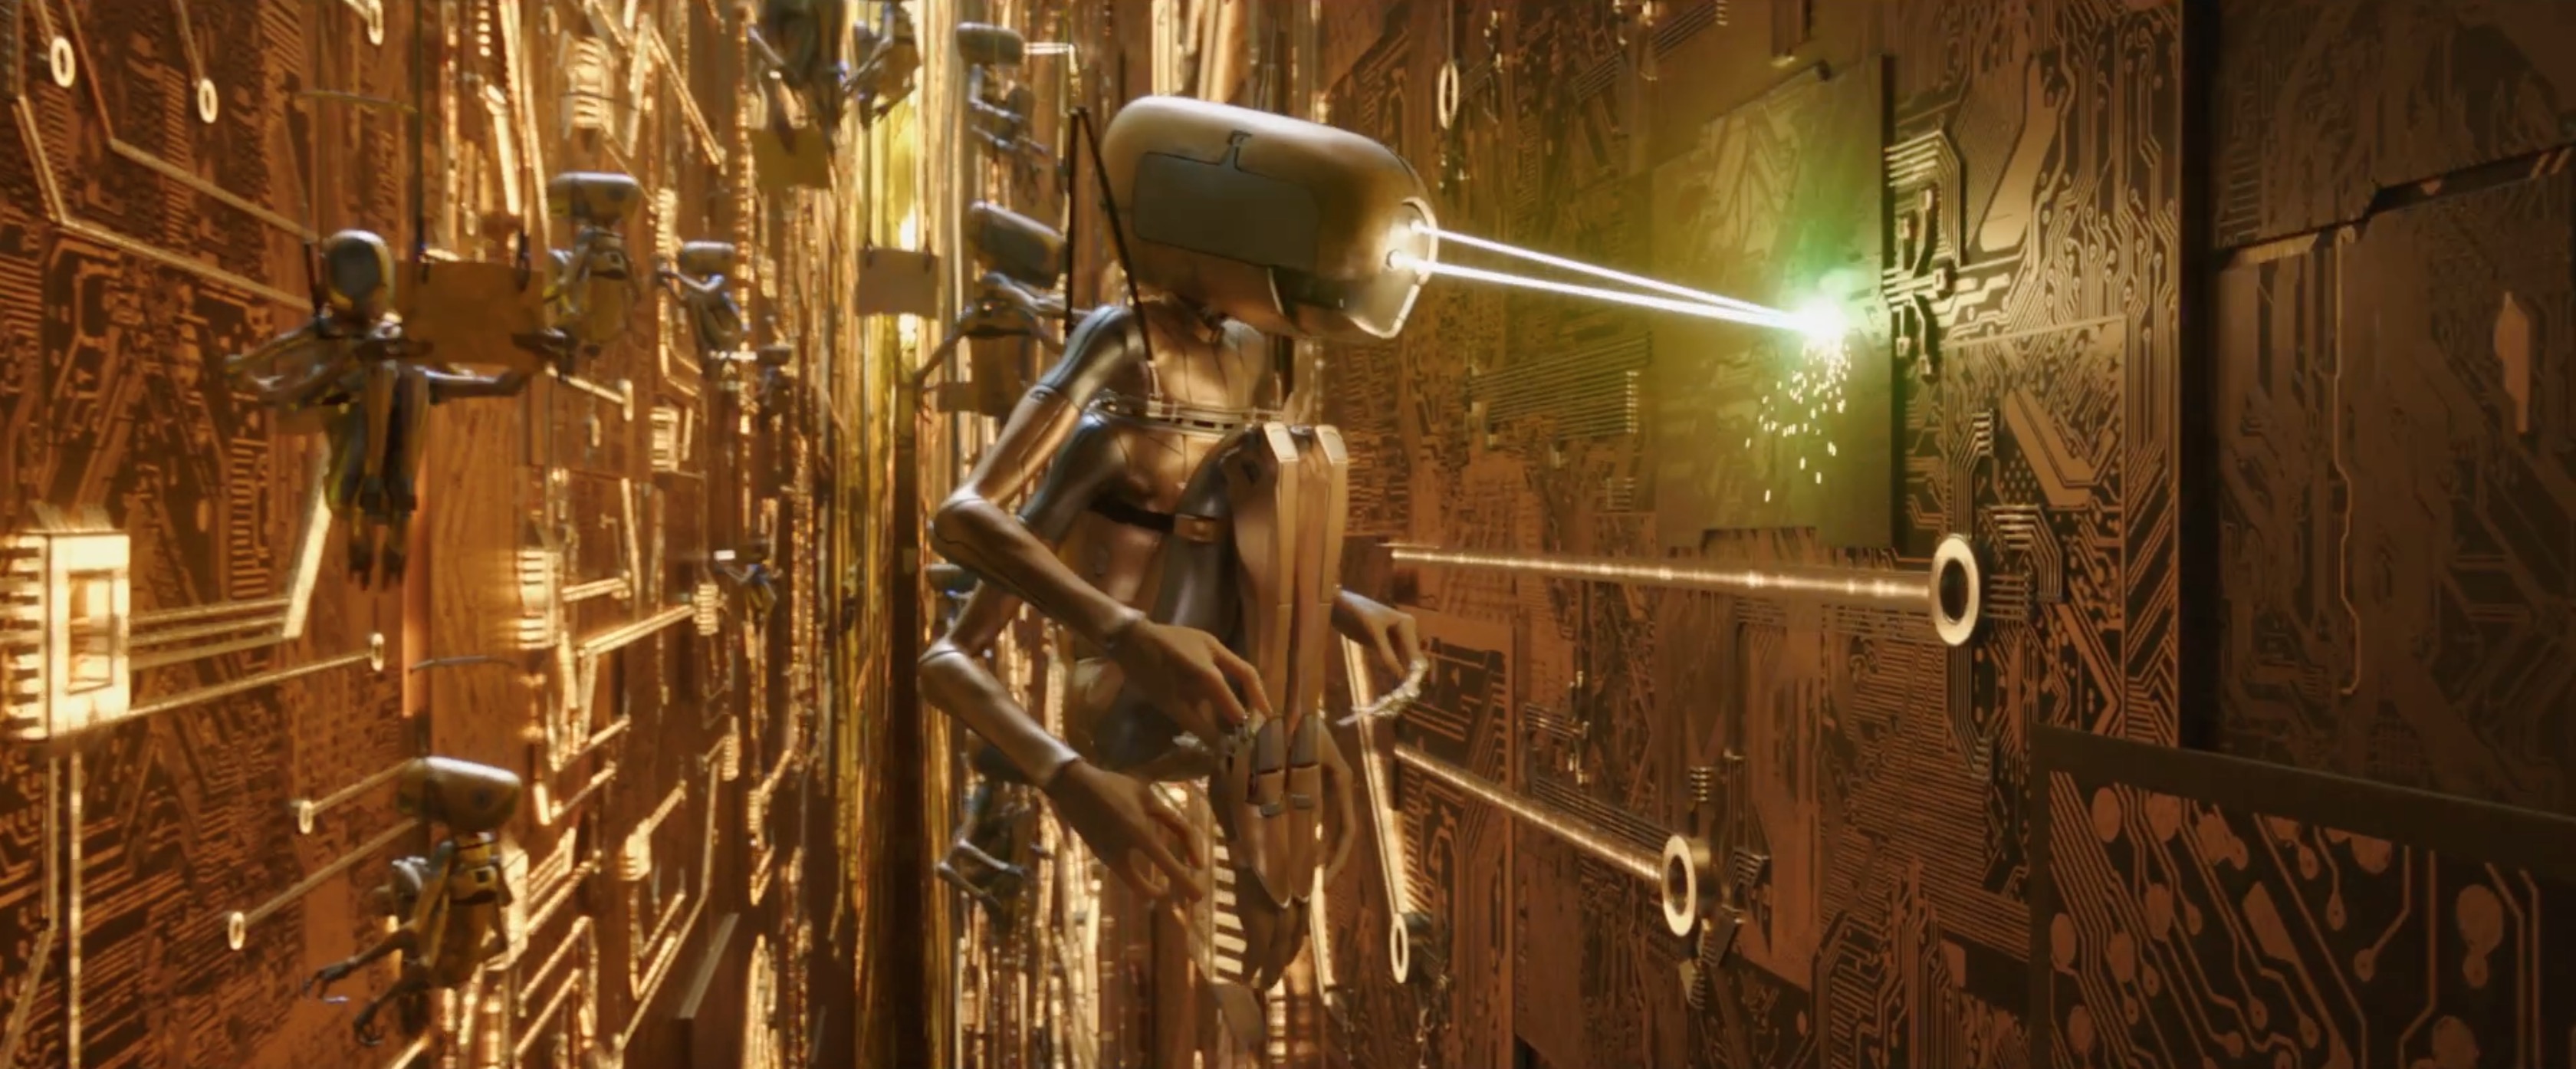 One of the incredible species living on Alpha, created by WETA Digital. Image via iamag.co | Valerian and the City of a Thousand Planets movie review | onetakekate.com